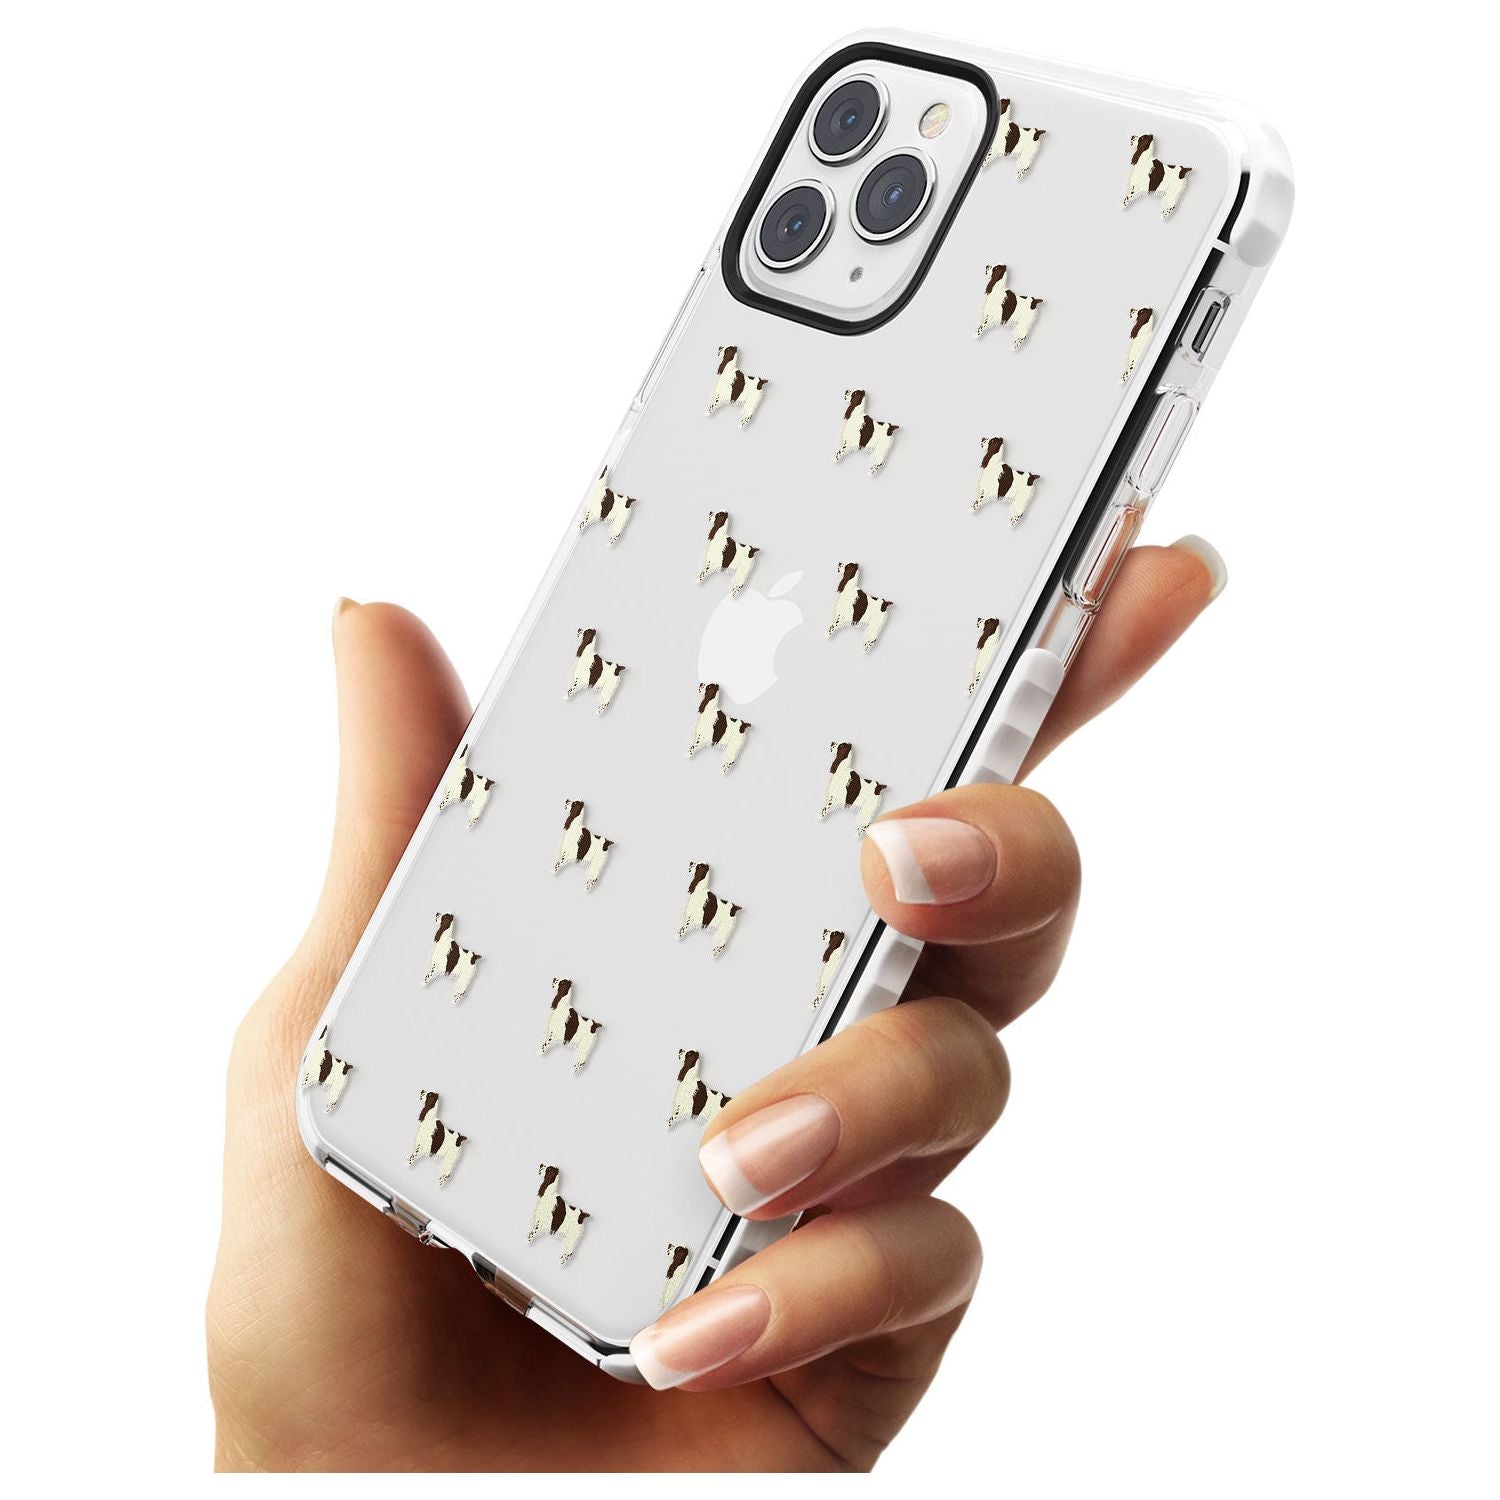 English Springer Spaniel Dog Pattern Clear Impact Phone Case for iPhone 11 Pro Max